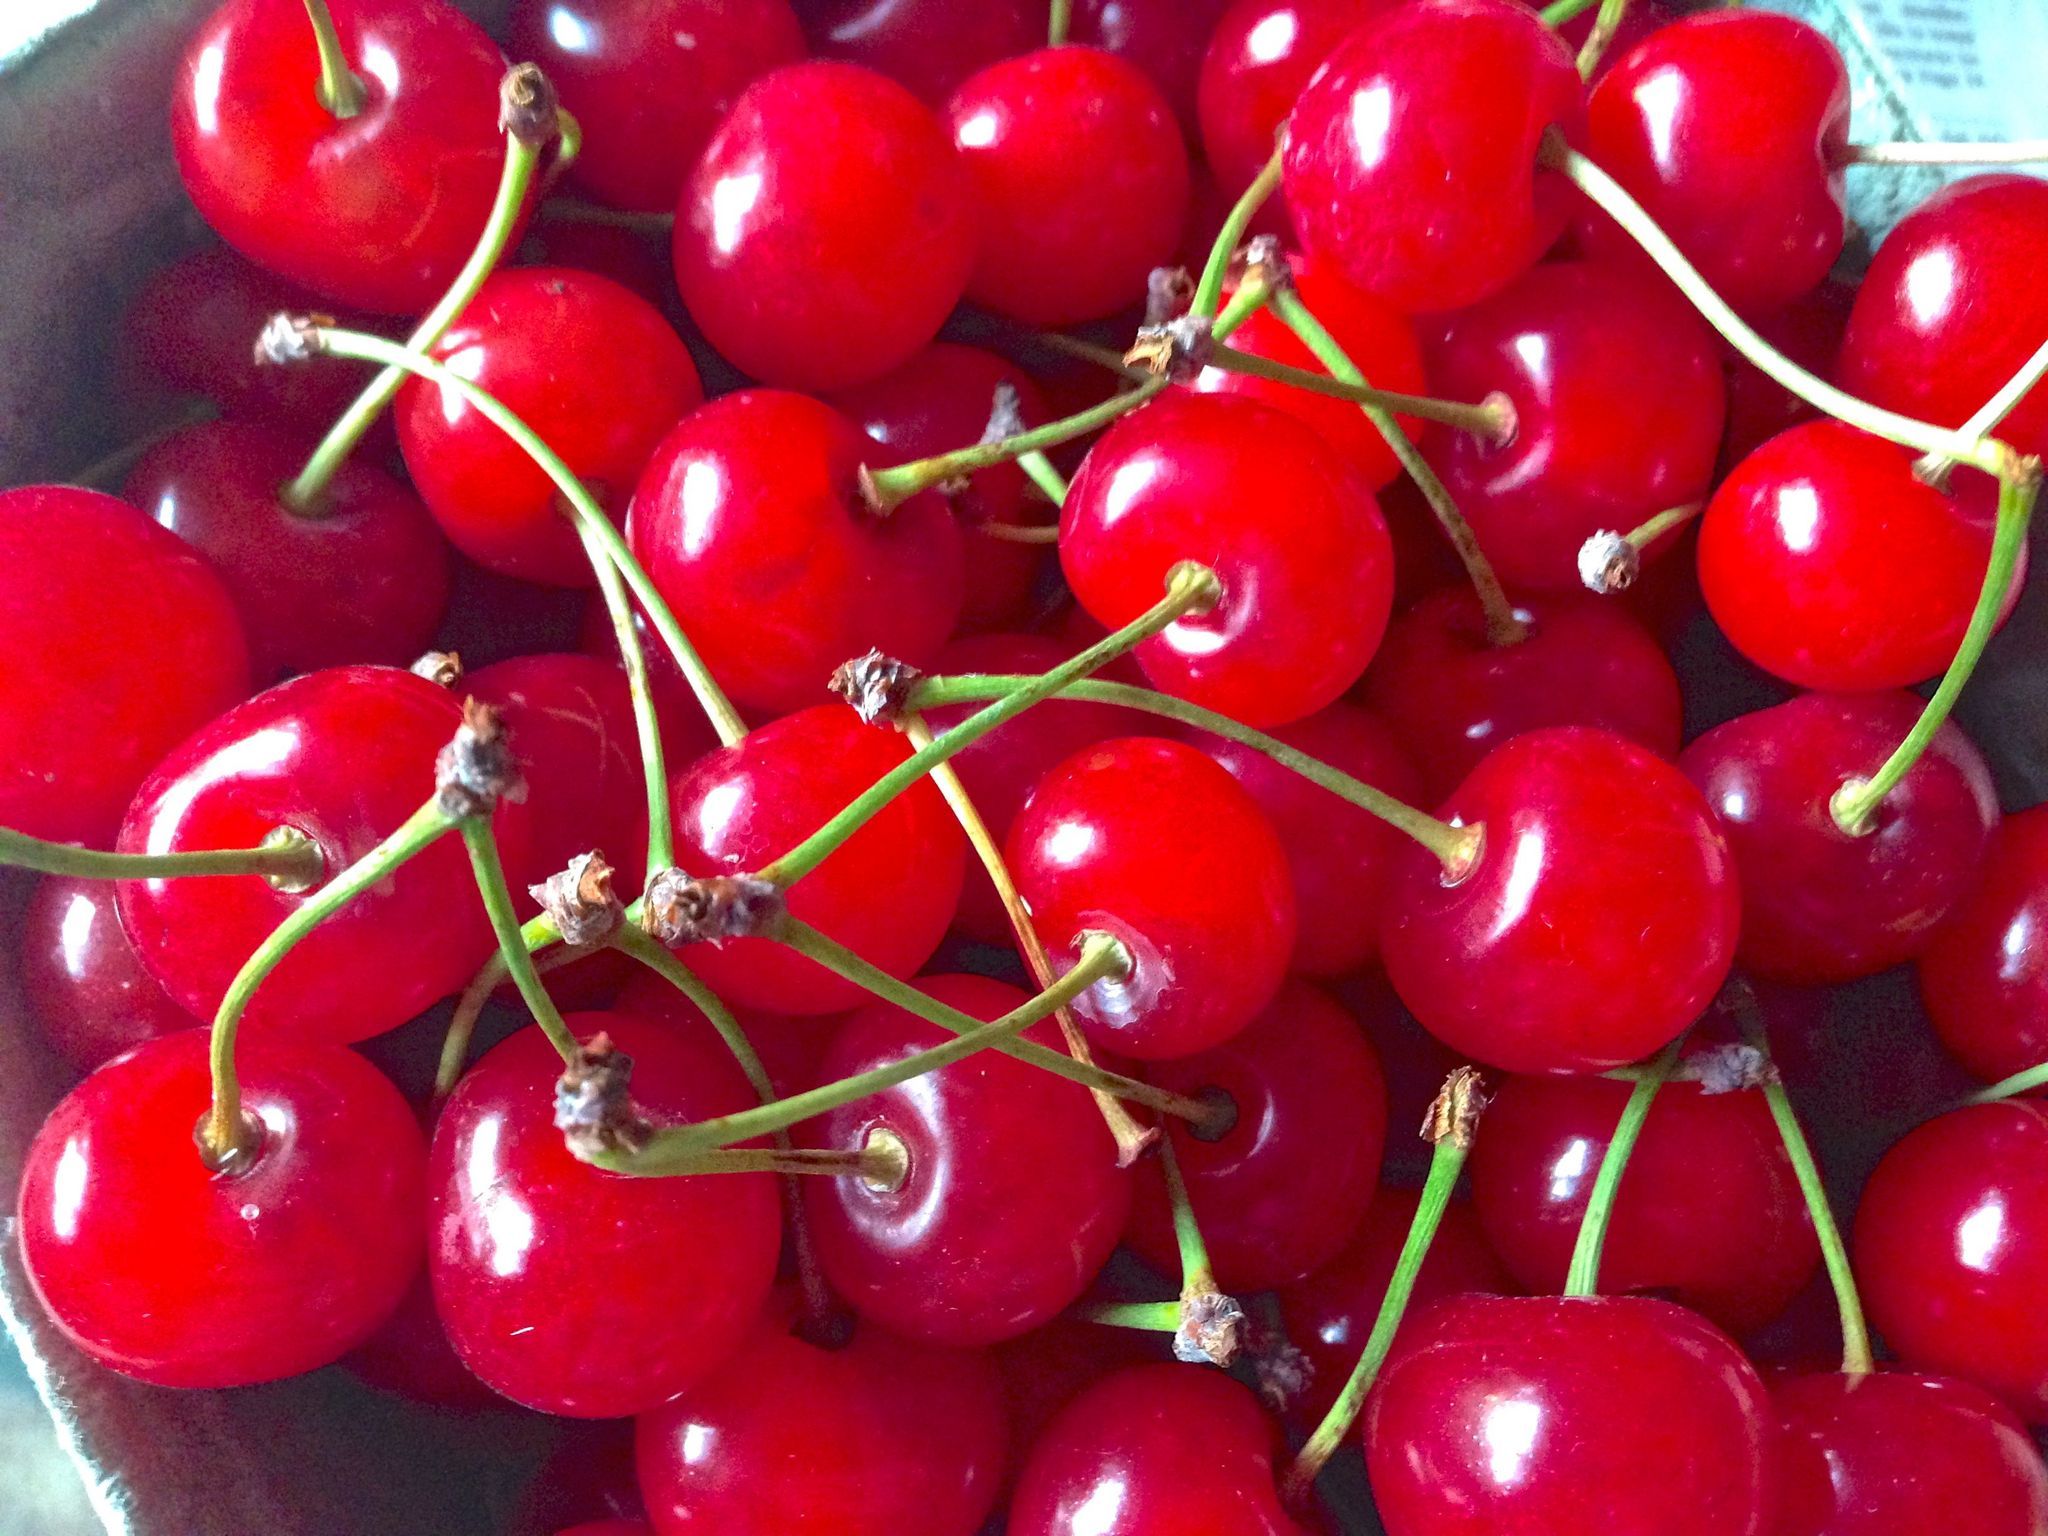 It's here but short: Northeast Ohio cherry picking time